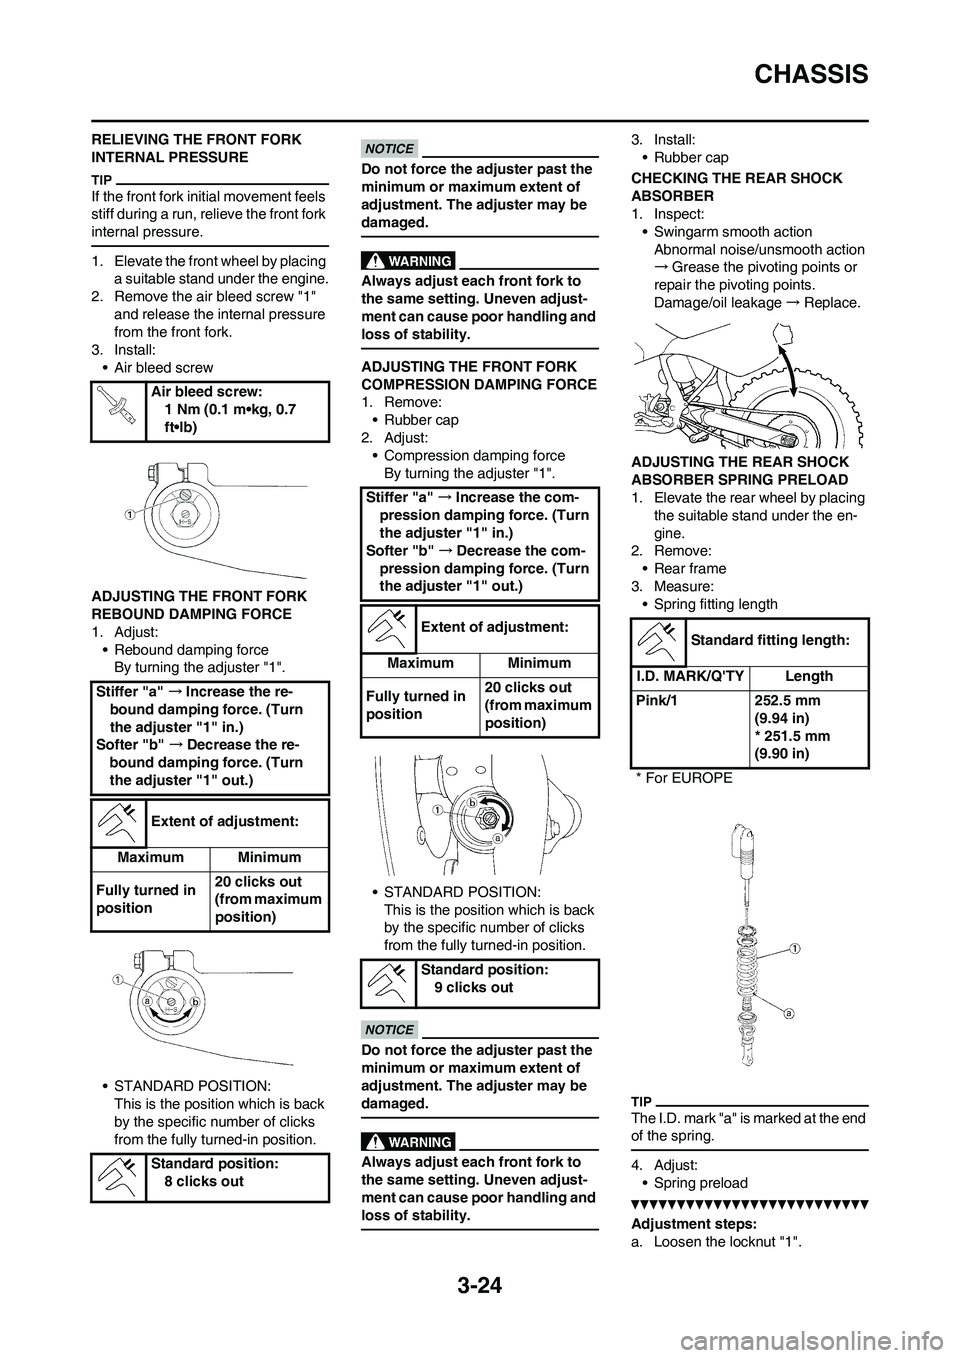 YAMAHA WR 450F 2010 Owners Manual 3-24
CHASSIS
RELIEVING THE FRONT FORK 
INTERNAL PRESSURE
If the front fork initial movement feels 
stiff during a run, relieve the front fork 
internal pressure.
1. Elevate the front wheel by placing 